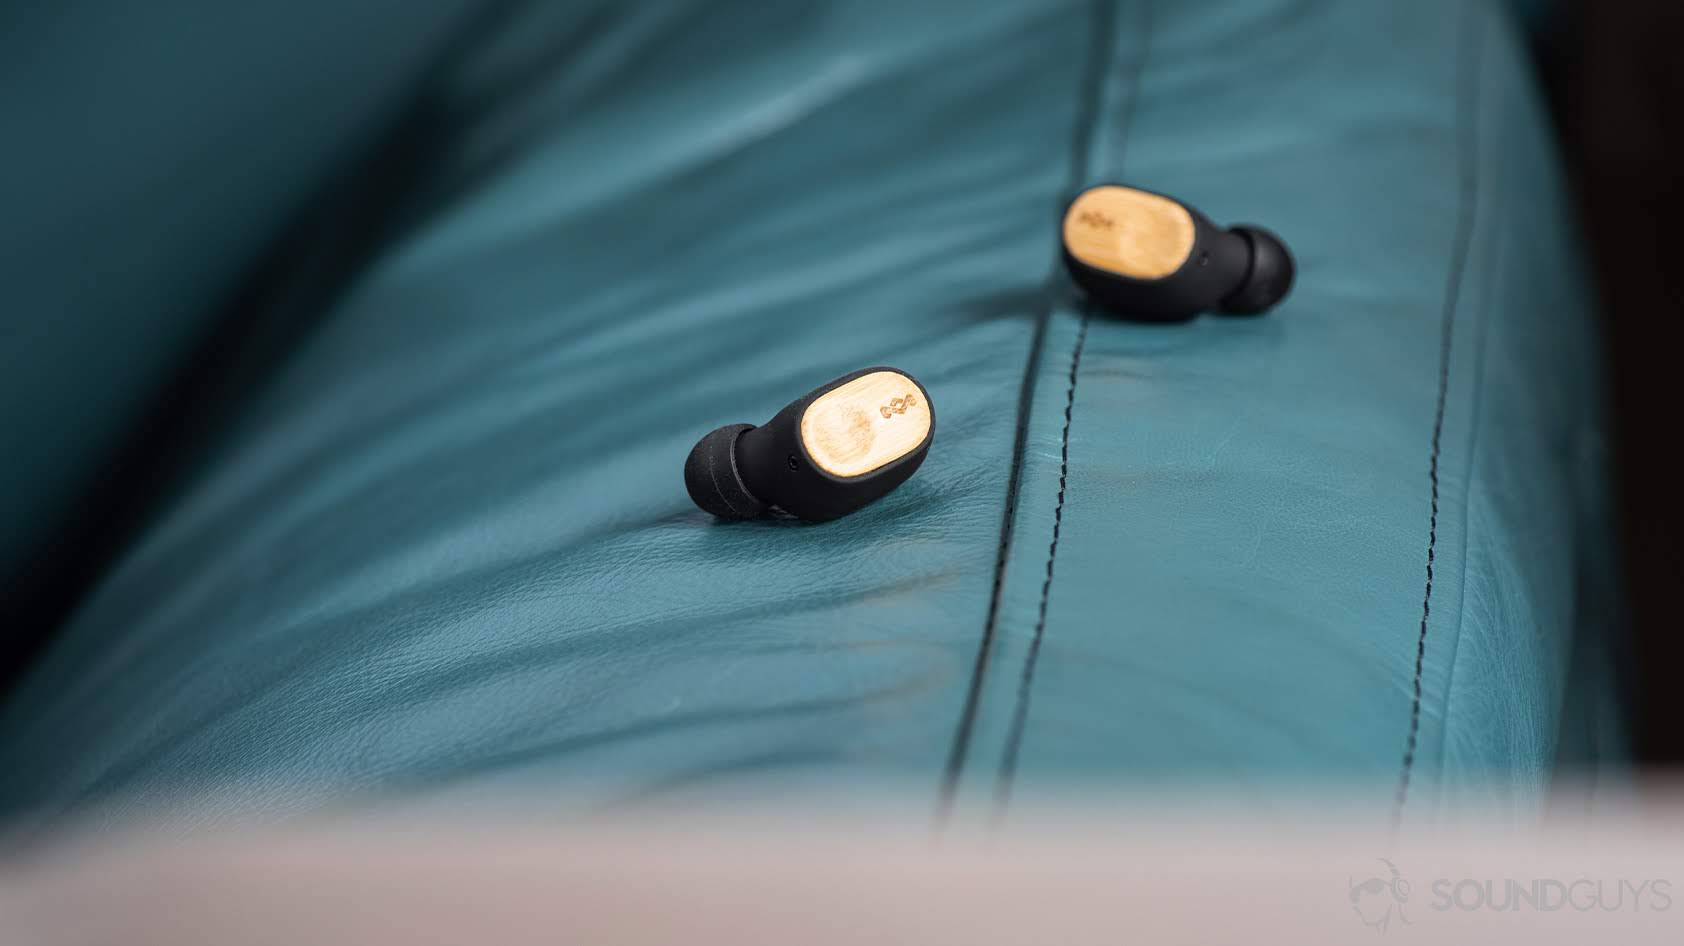 The House of Marley Liberate Air earbuds on a teal surface.